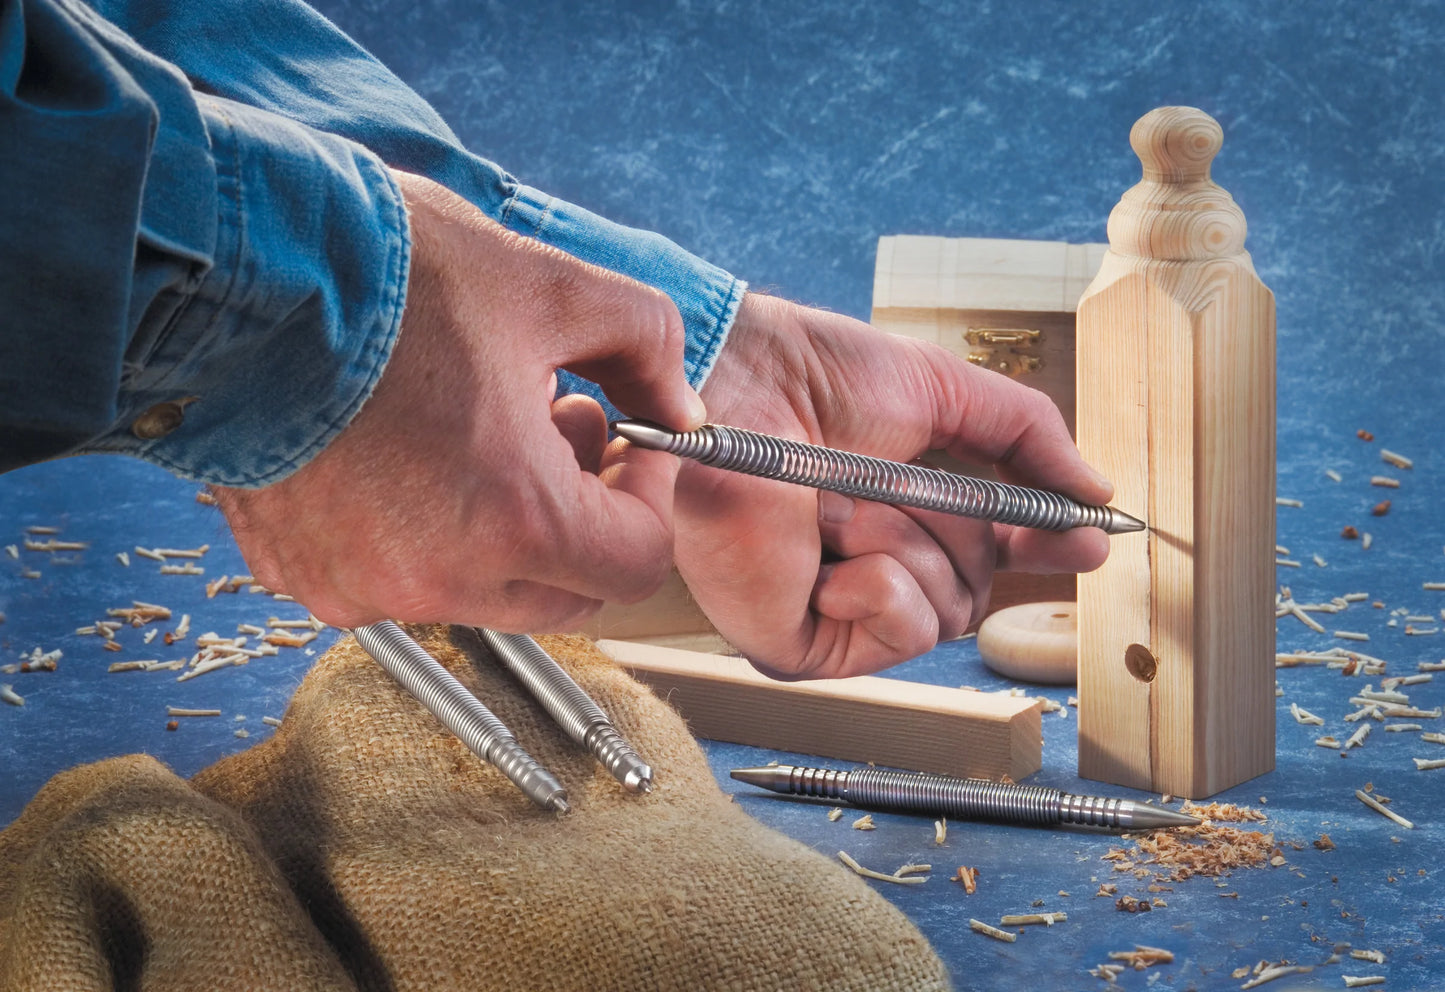 Any trim and finish carpenters will benefit from this tool set! Signature Tools is excited to carry Springtools as one of the tools we carry. 